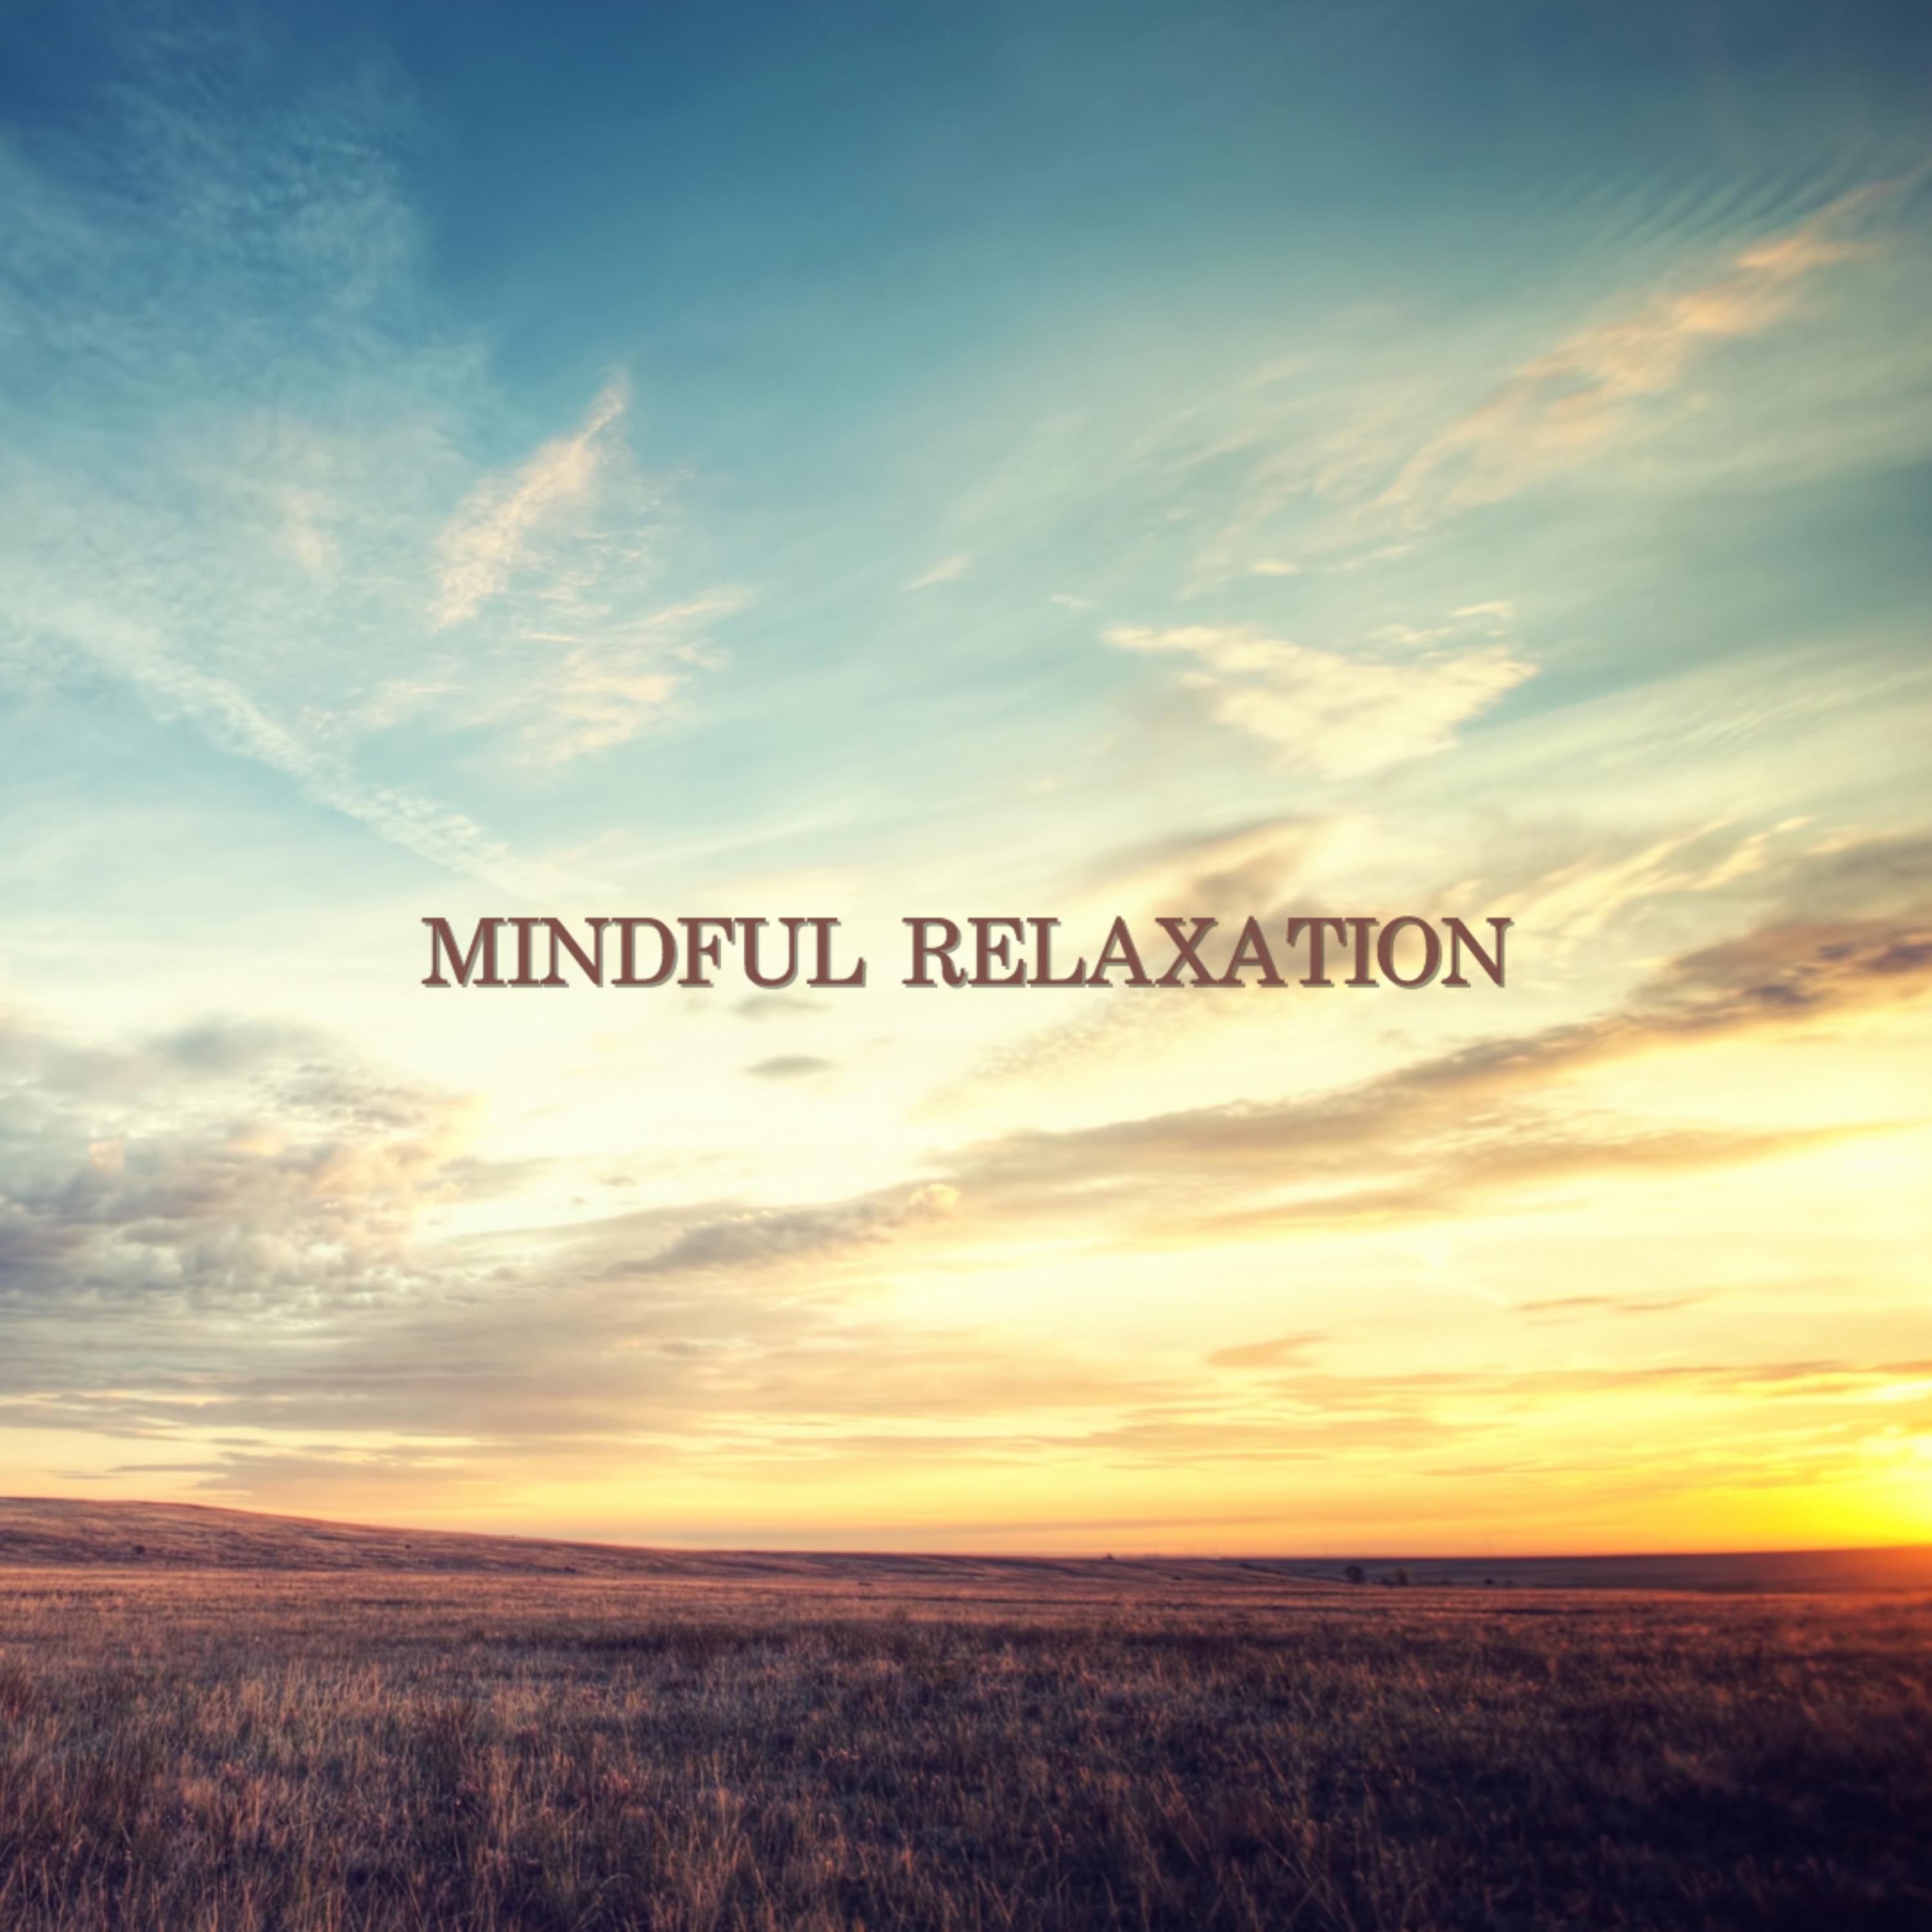 Mindful Relaxation